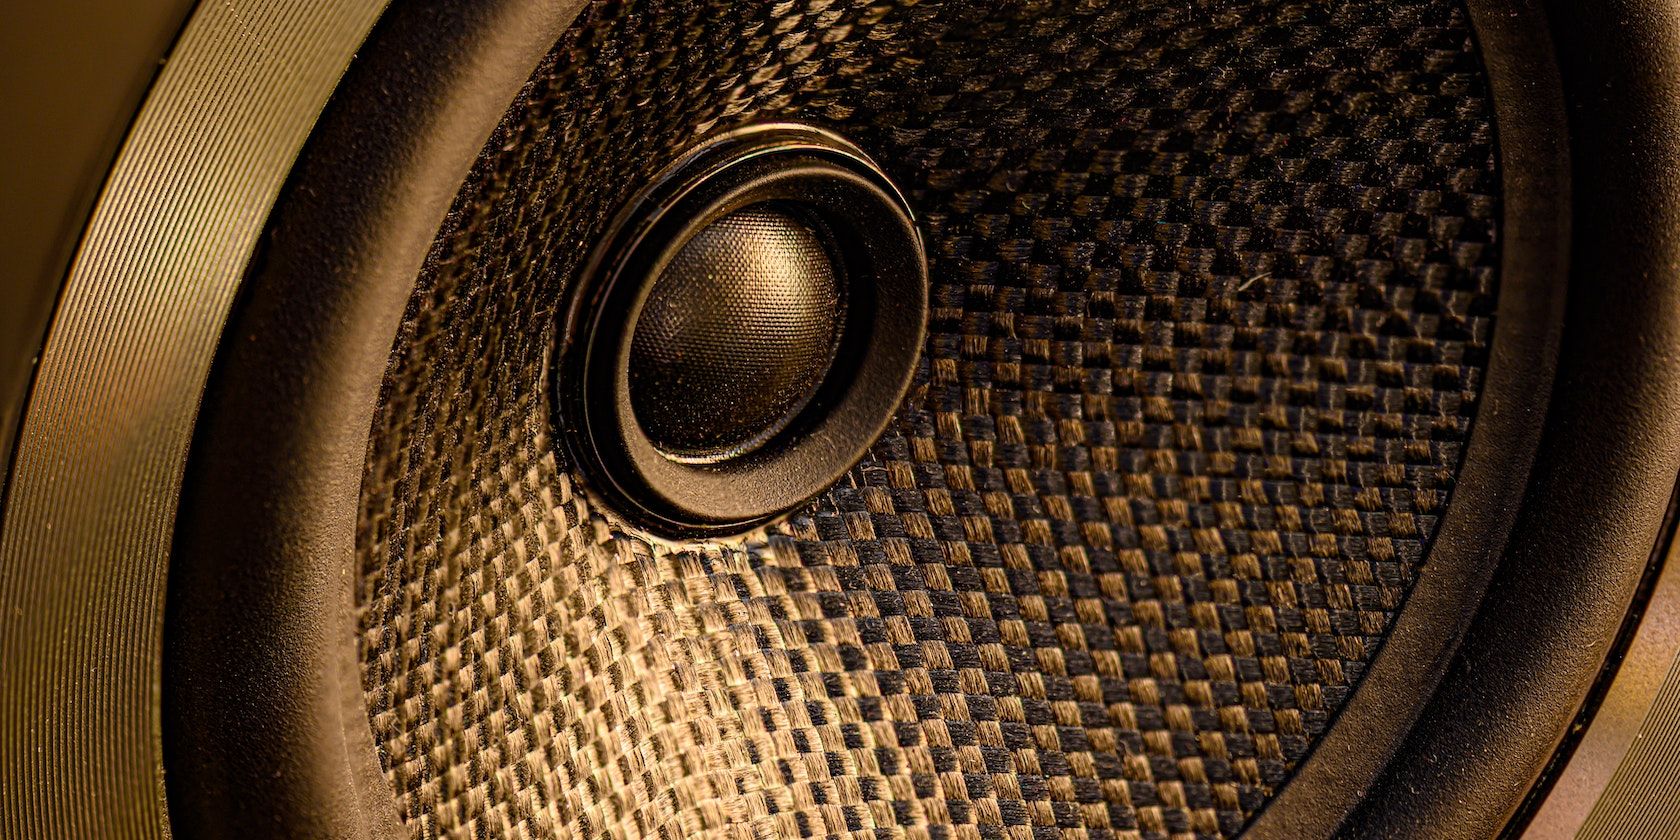 A closeup photo of a professional audio monitor or speaker